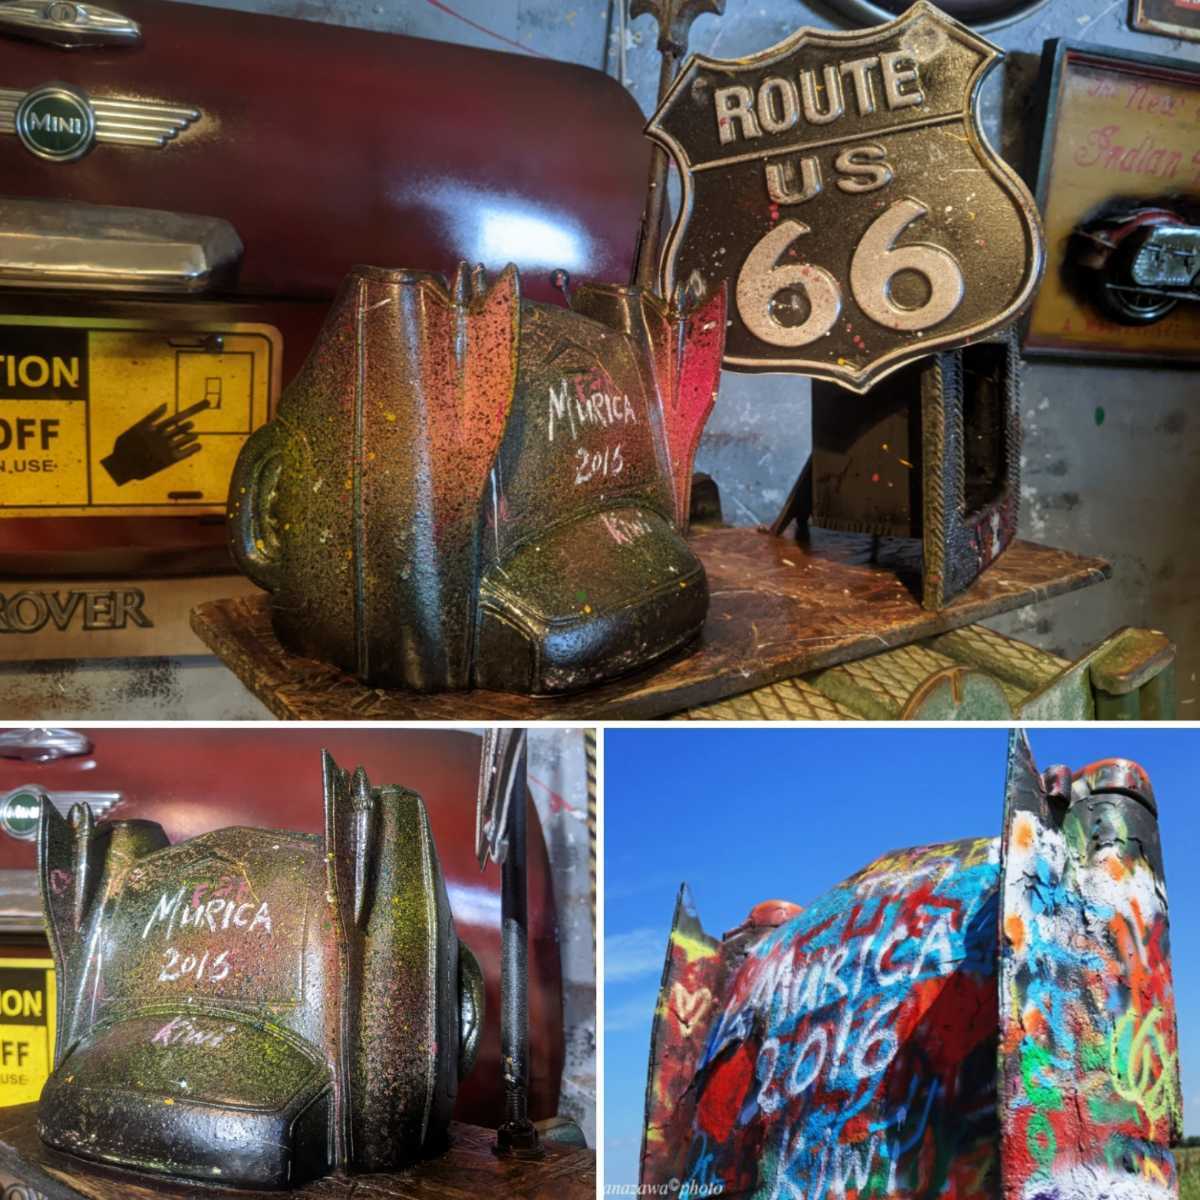 Route 66 Cadillac Ranch/American Vintage Style/Roll Paper & Towel Holder/#ROUTE66#Texas#TEXAS#Garage, handmade works, interior, miscellaneous goods, others